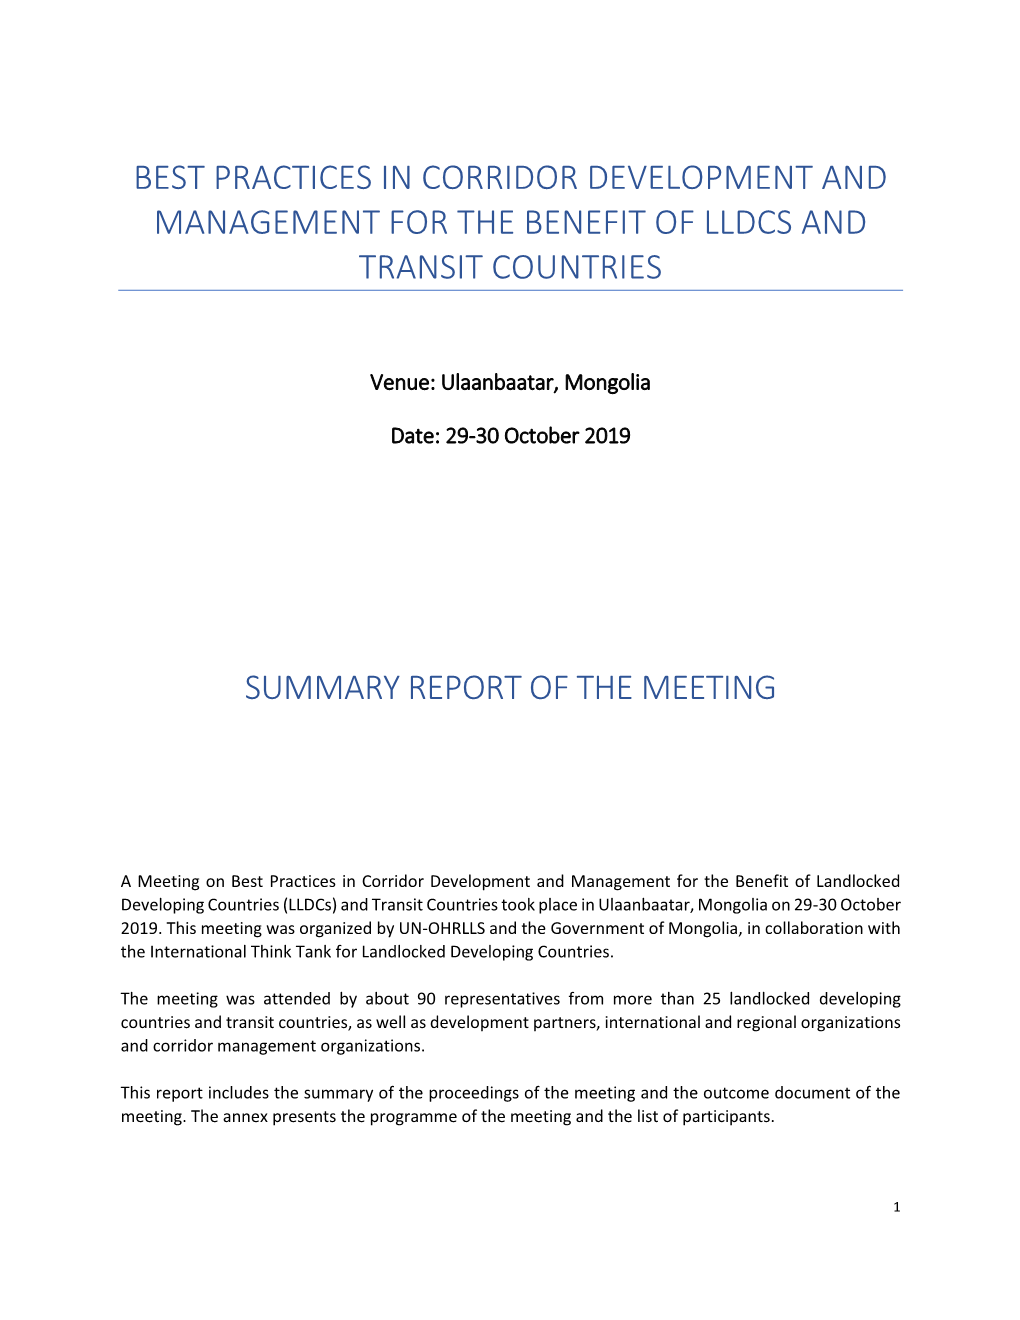 Best Practices in Corridor Development and Management for the Benefit of Lldcs and Transit Countries